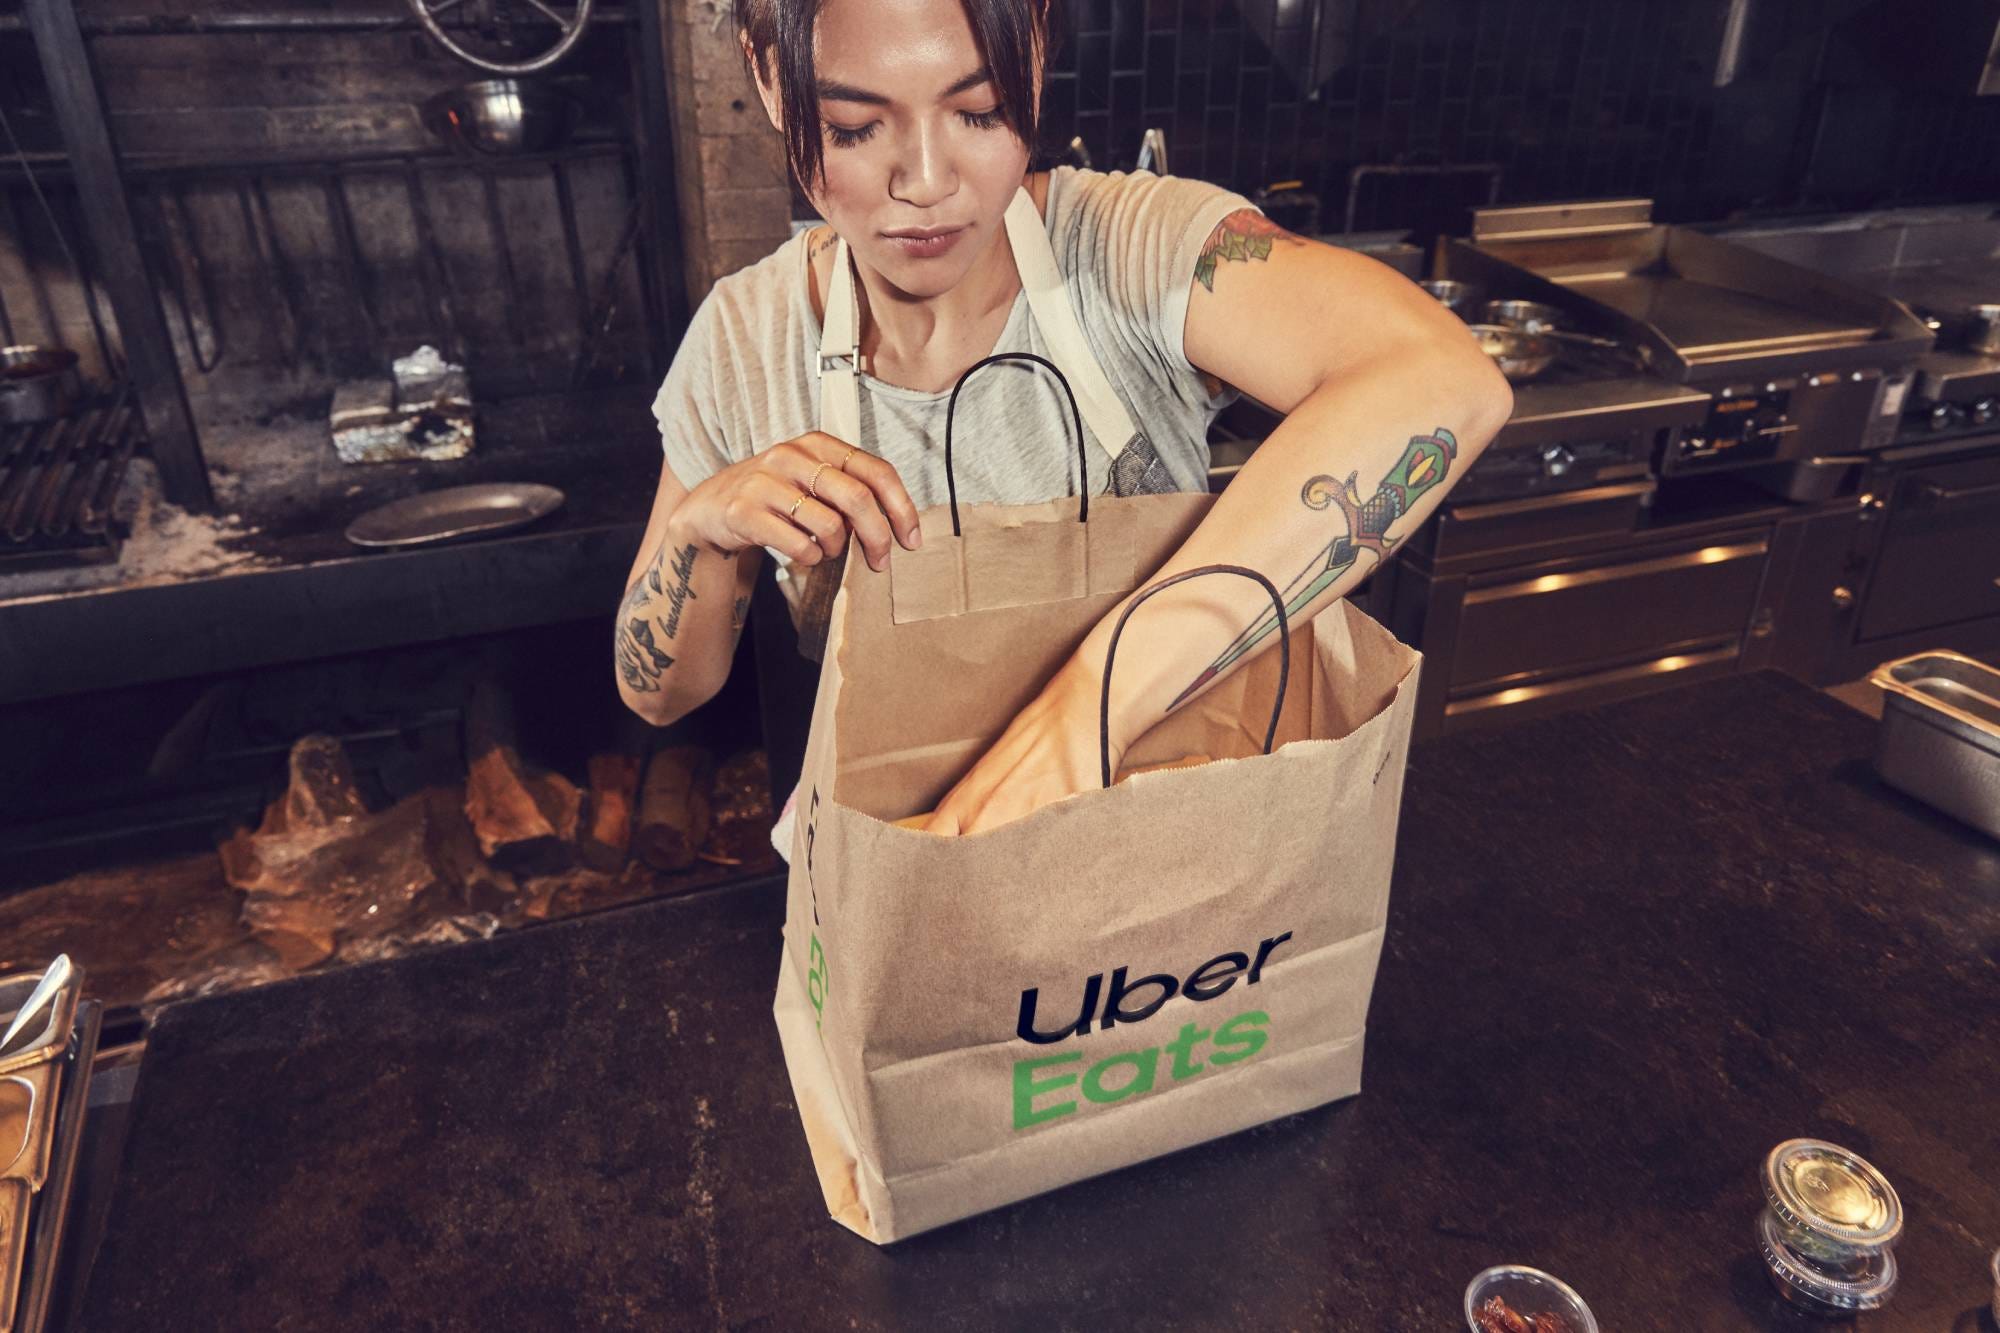 Ghost kitchens are existing restaurants that cook food only available for order online and delivery, often by UberEats, Door Dash or Grub Hub.